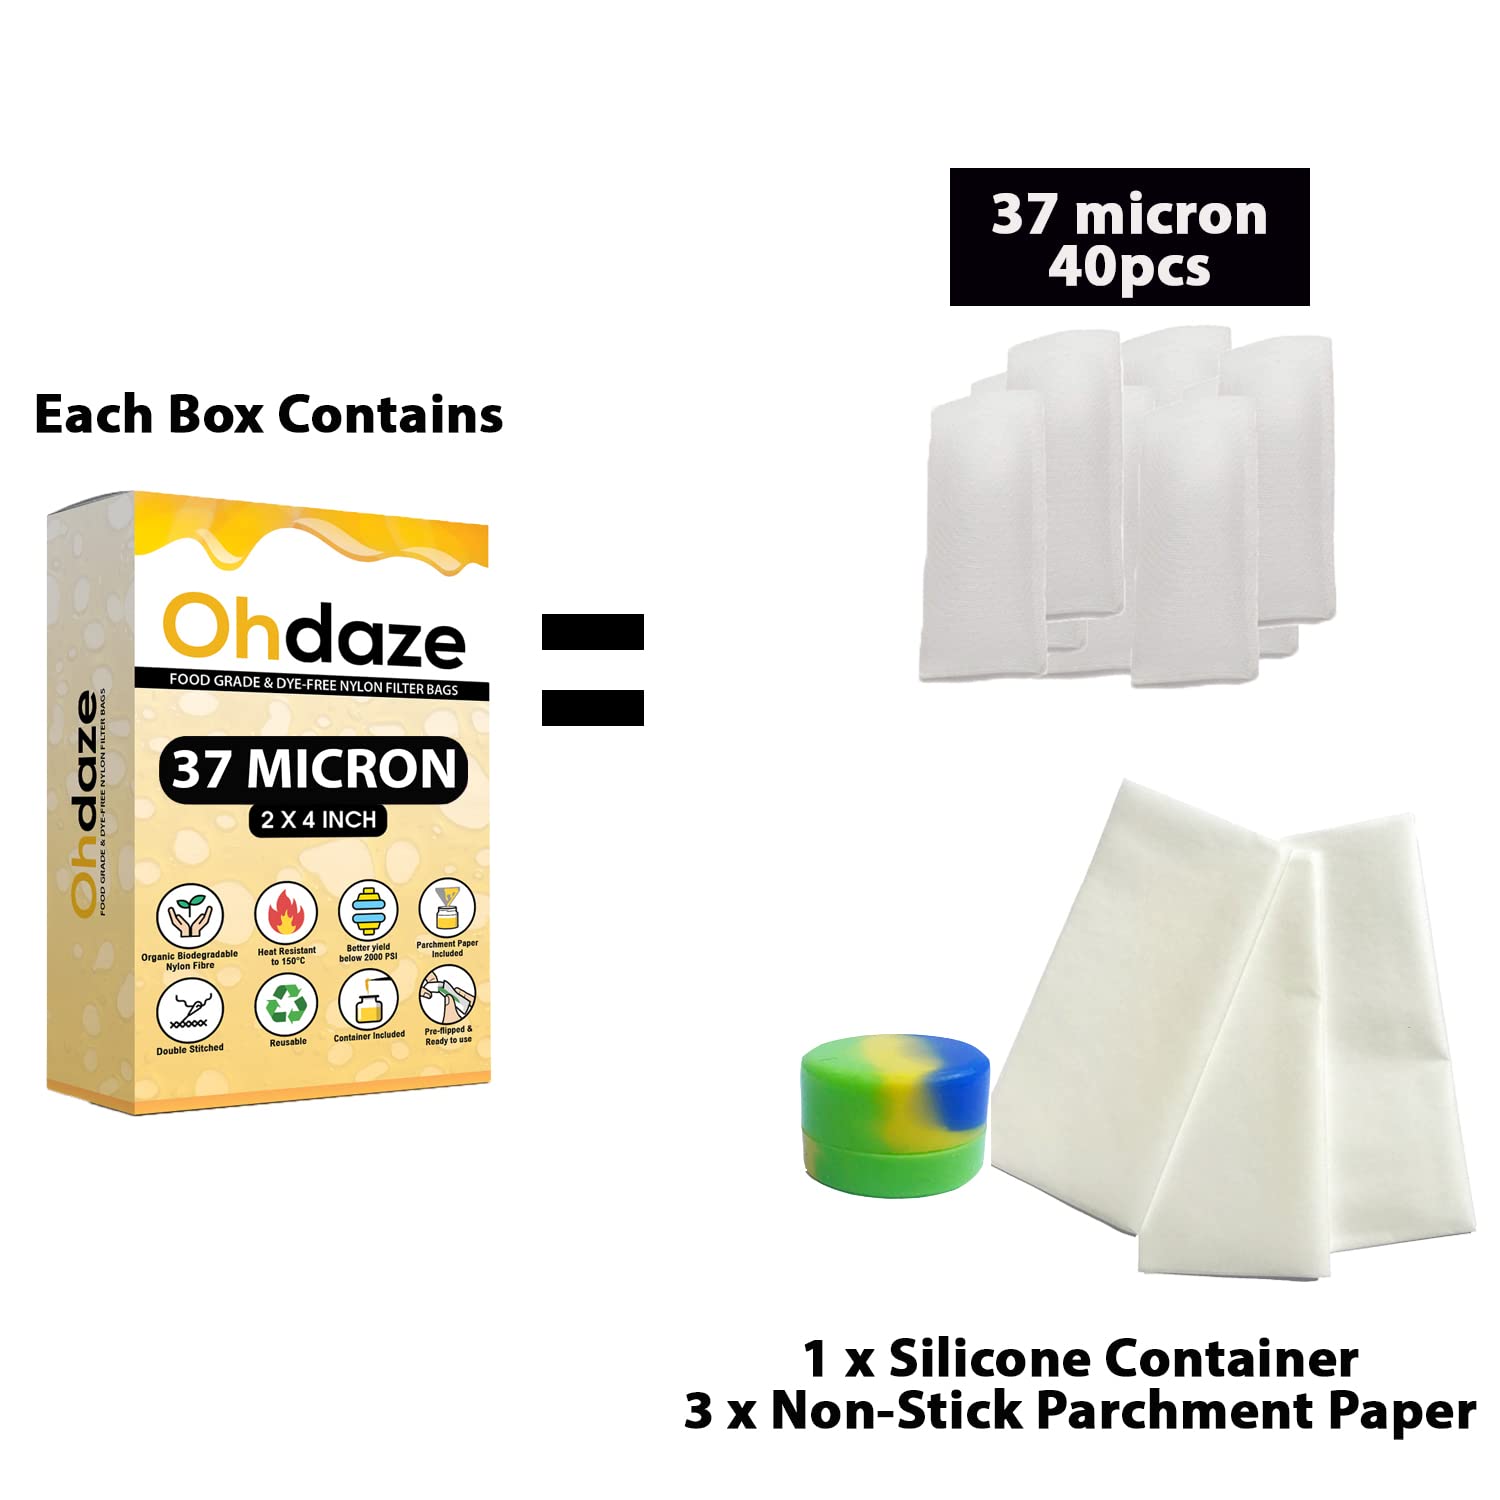 Ohdaze Rosin Bags 2x4 inch 40 Pack 37 Micron Press Bags – ohdaze